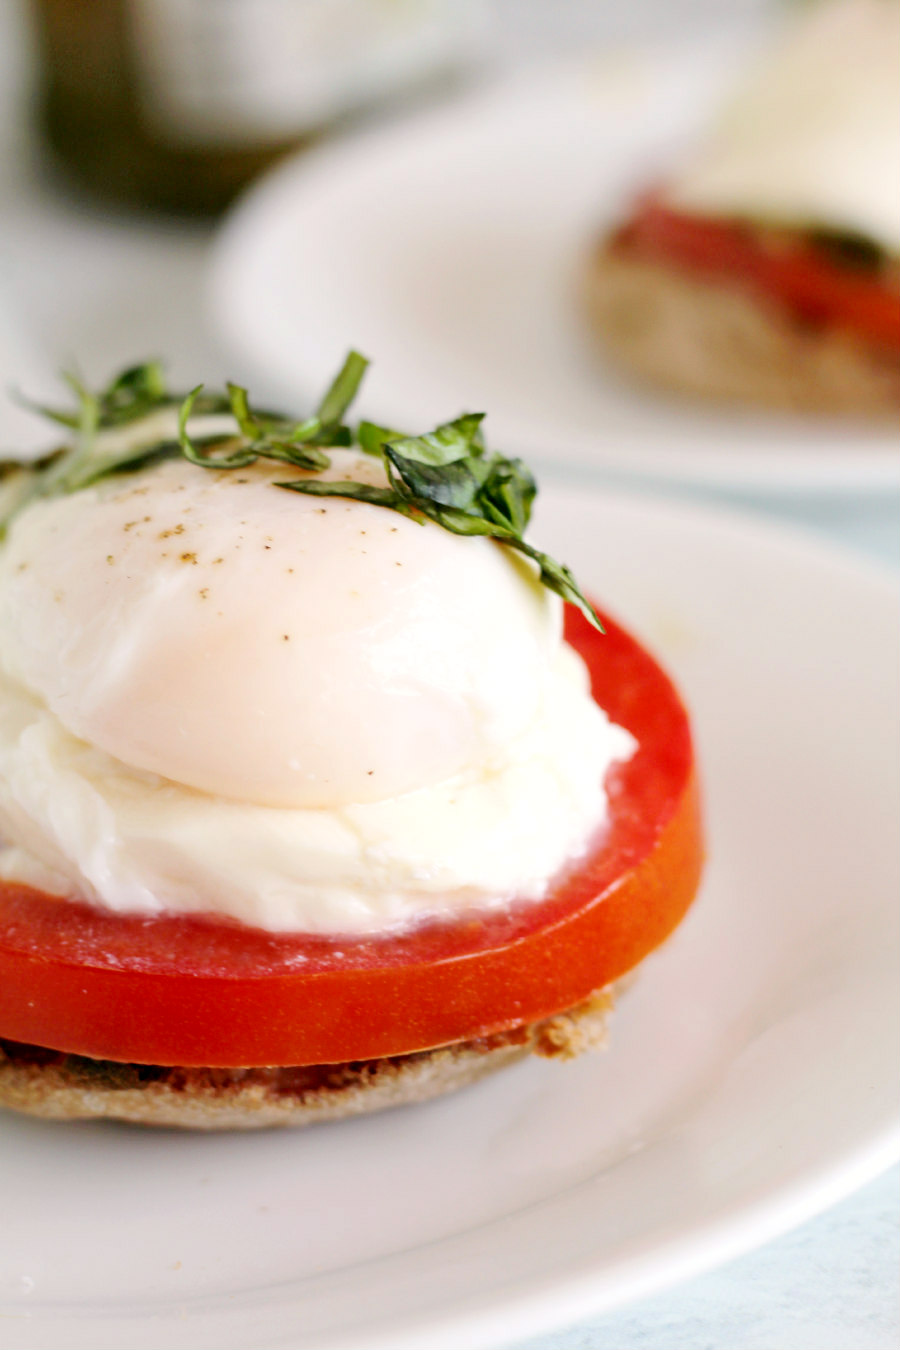 If you enjoy the traditional Italian flavors of Caprese Salad, you'll love this Poached Eggs Caprese recipe. Poached eggs on English muffins with tomato, basil, pesto, and fresh mozzarella for a hearty breakfast or Sunday brunch!